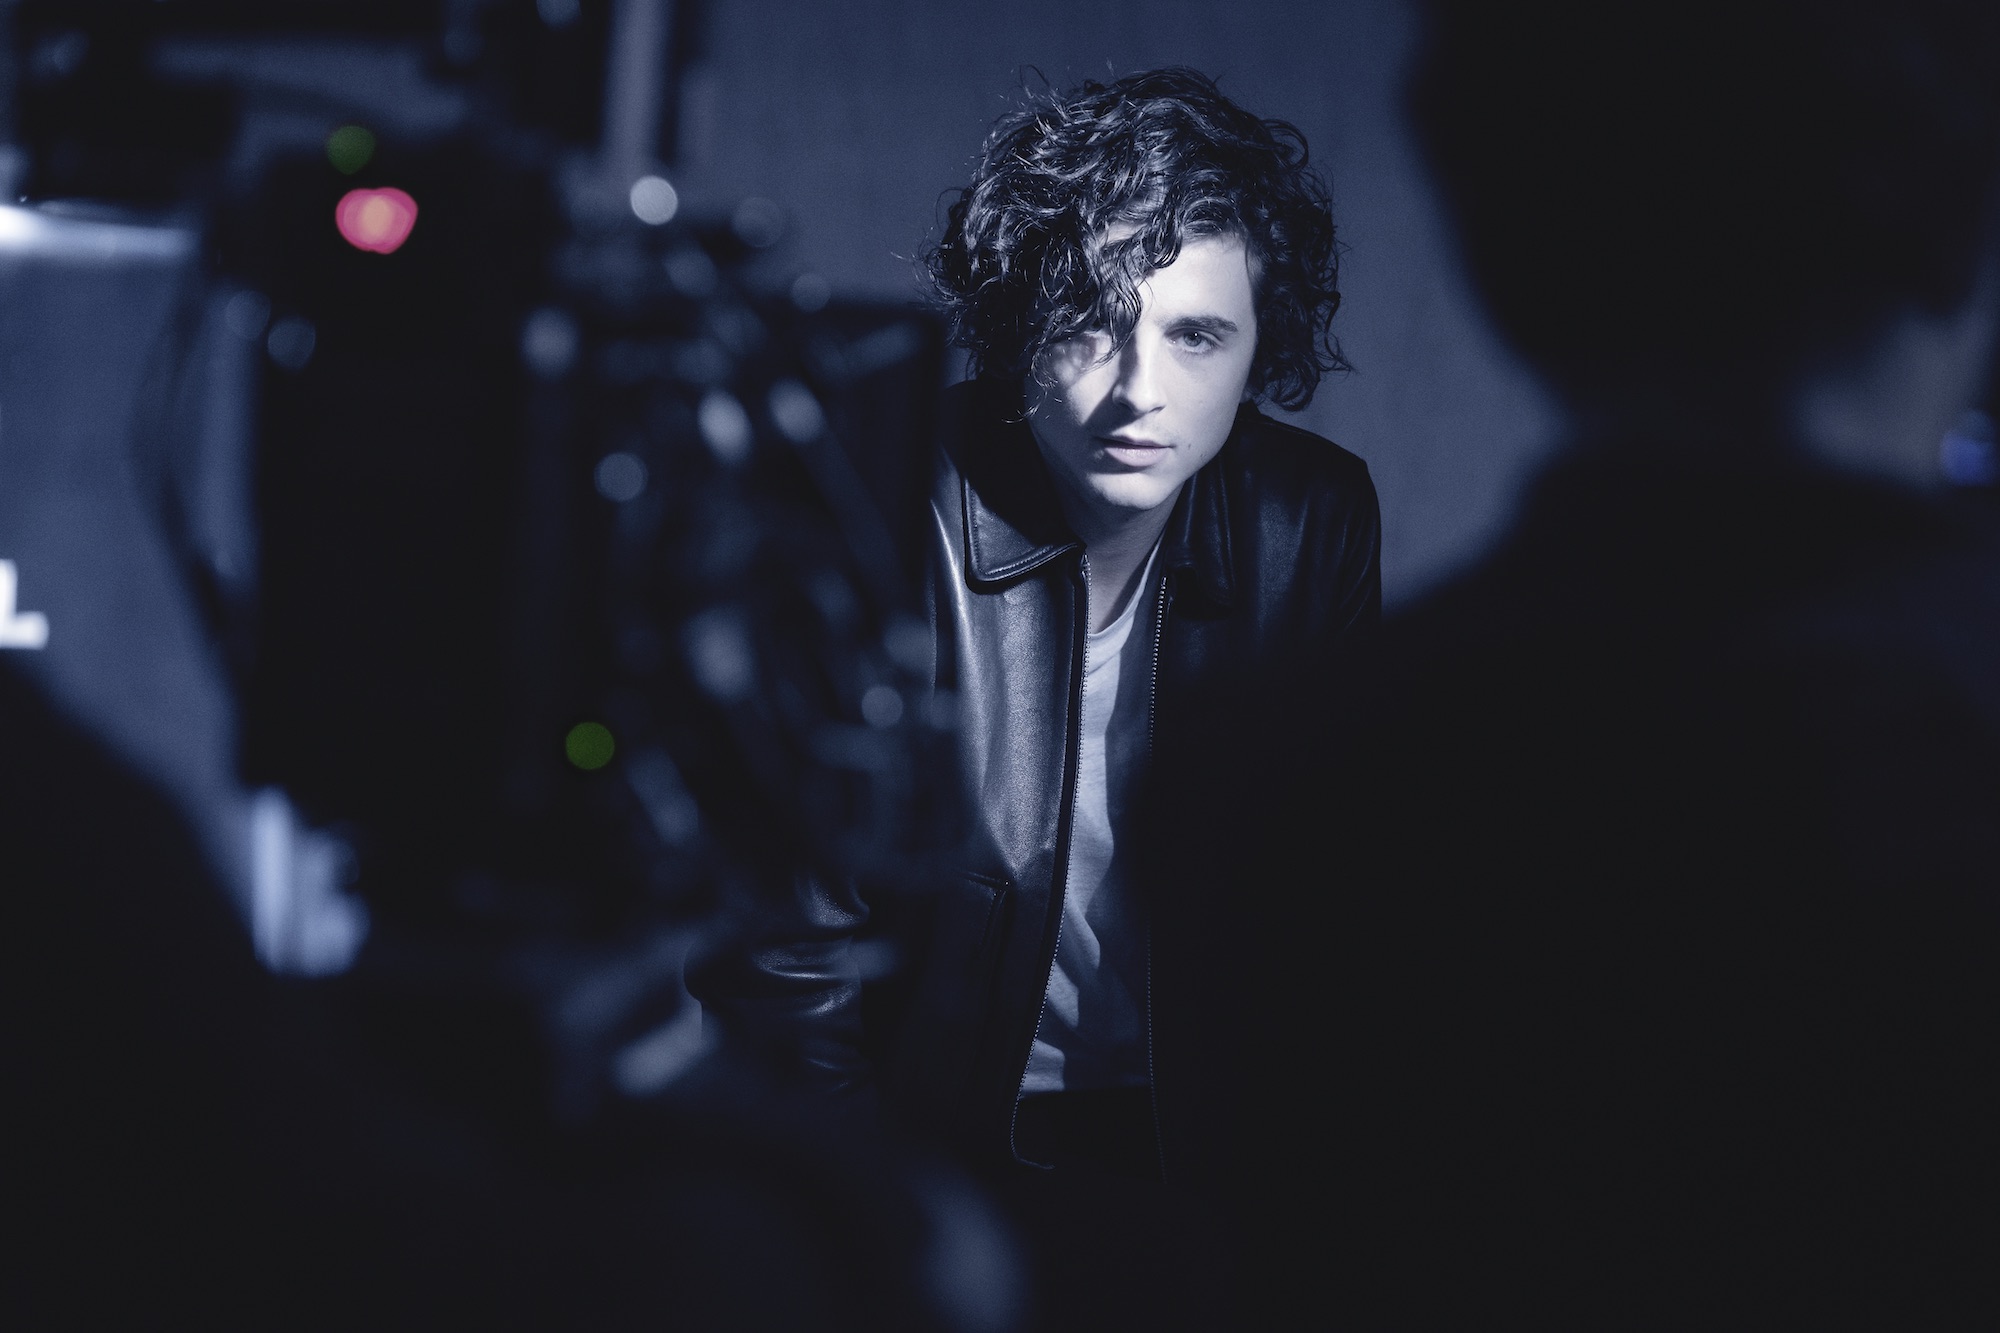 Behind the scene of the Bleu de Chanel campaign with Timothée Chalamet